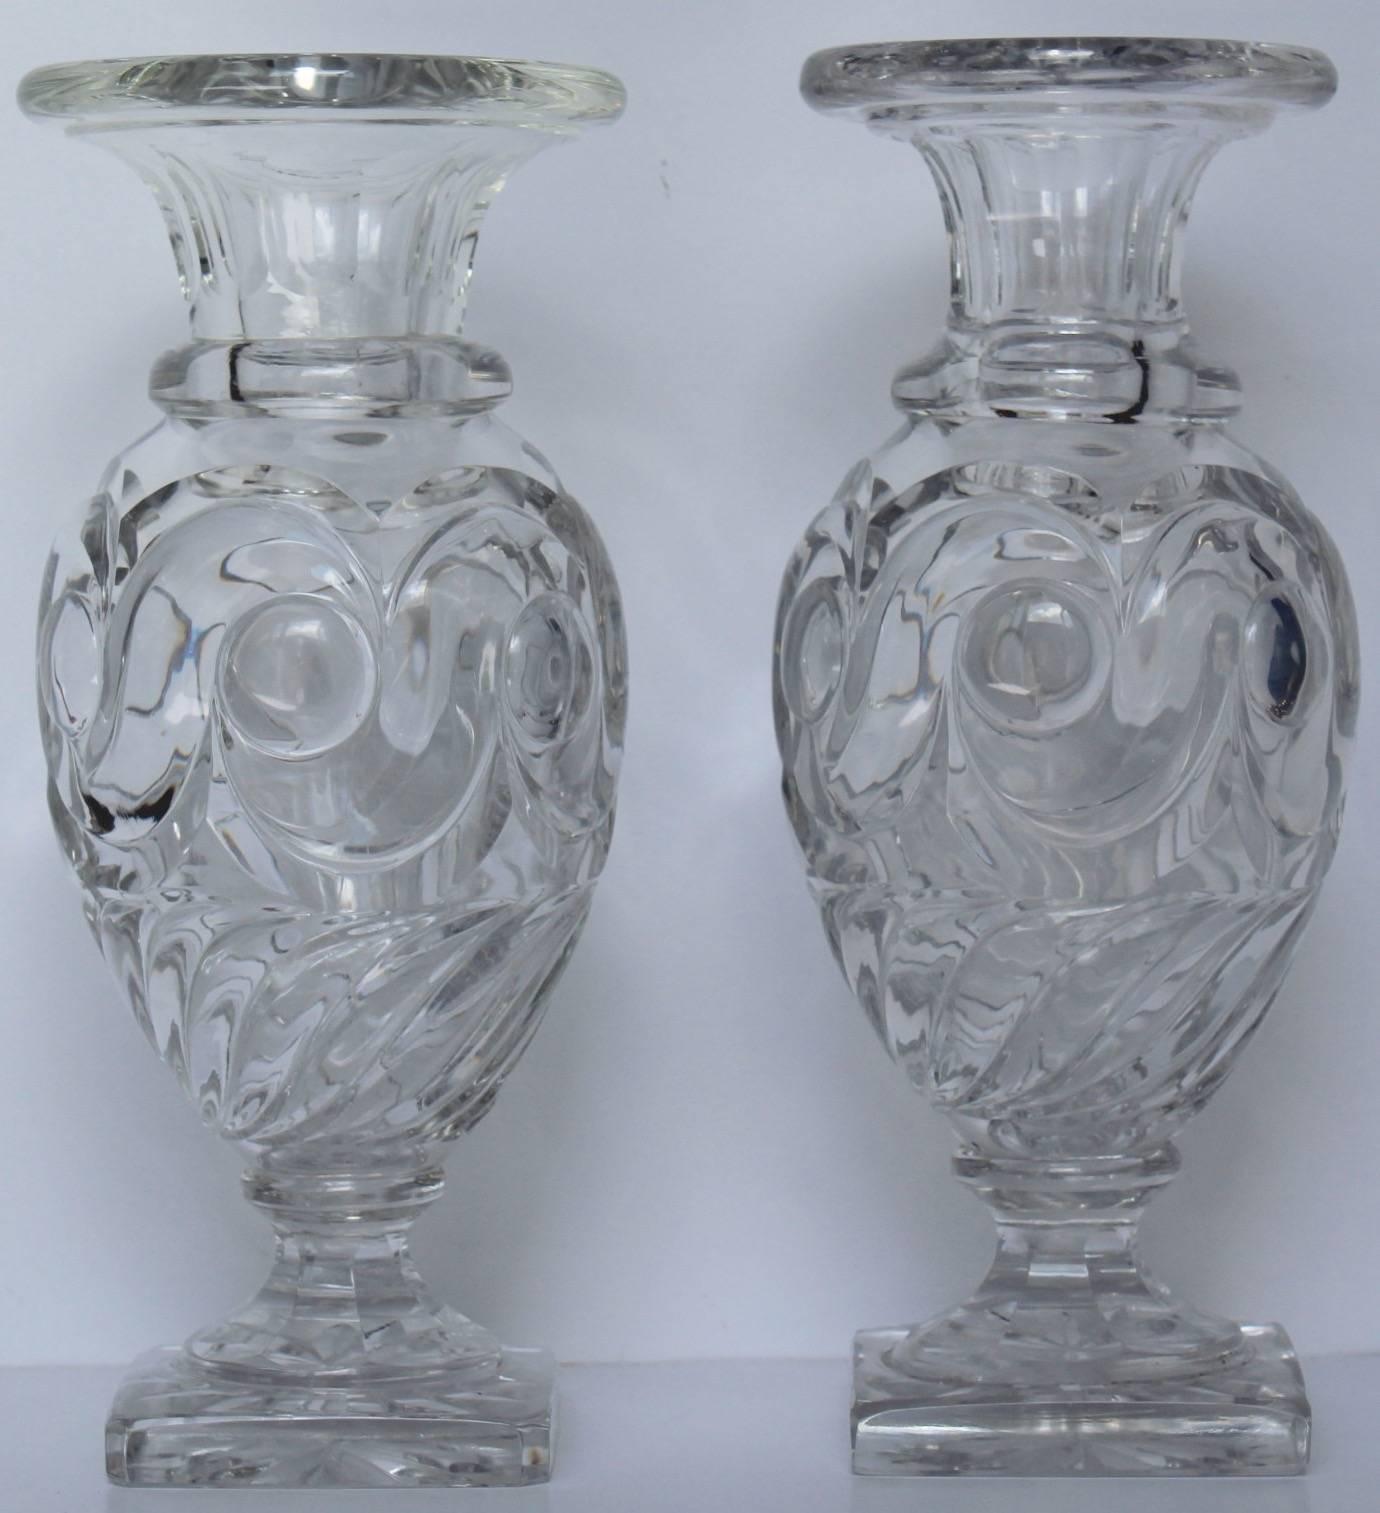 Charles X Pair of Early 19th Century Baccarat Handblown and Cut Crystal Vases